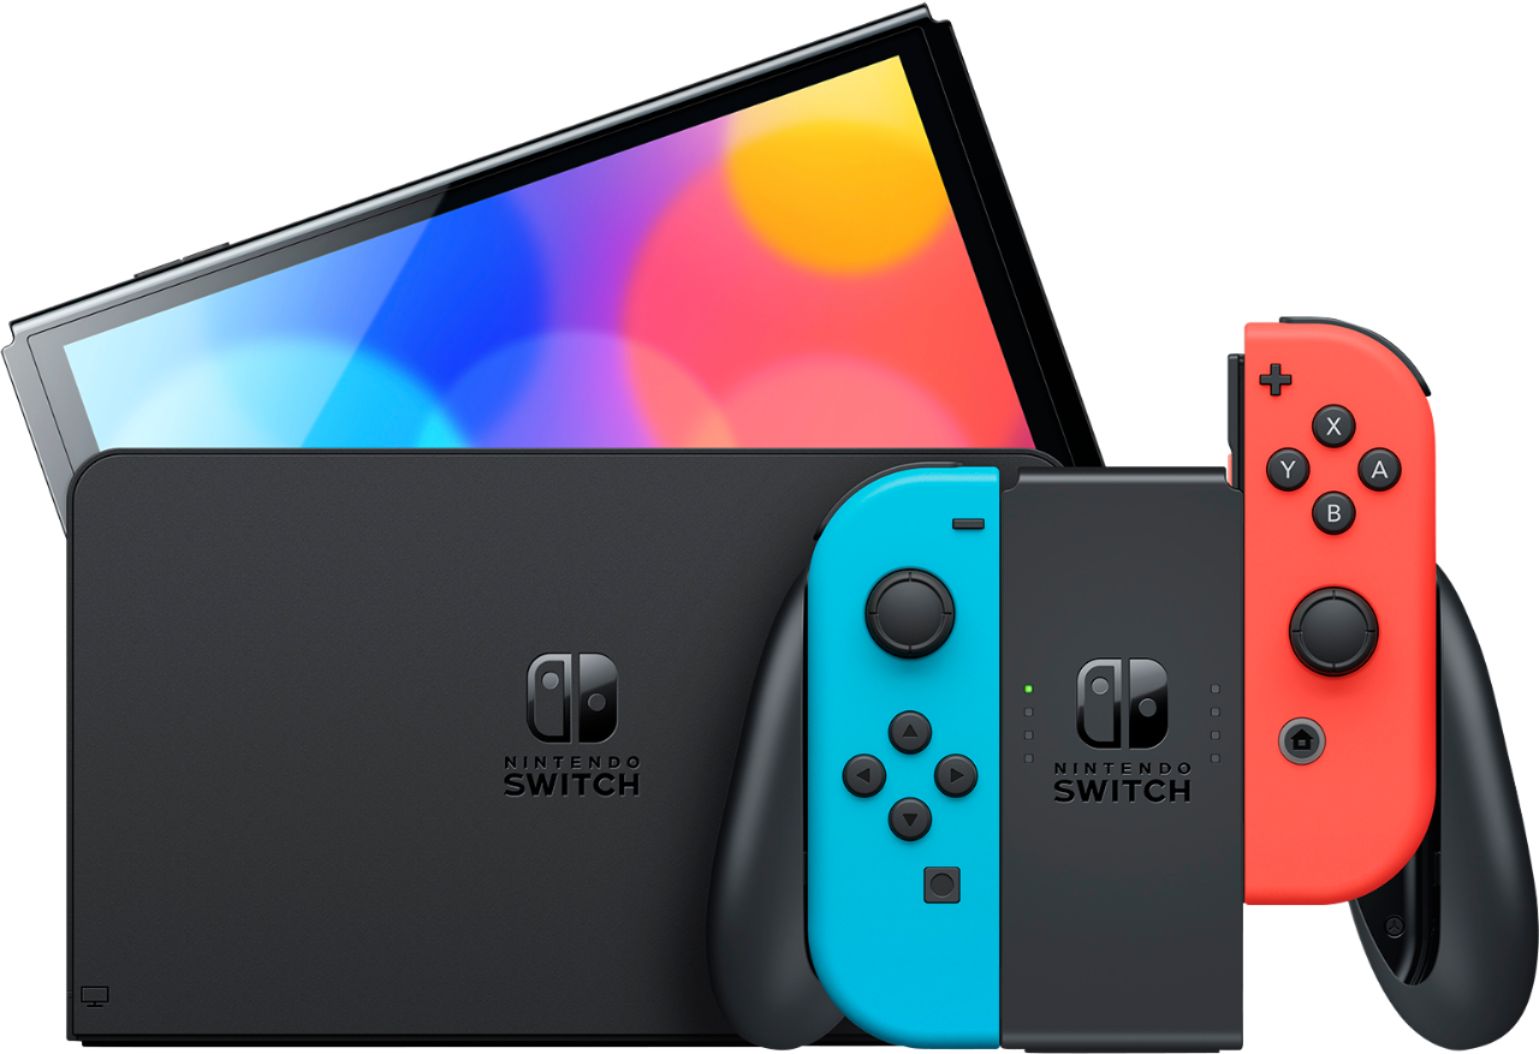 2022 New Nintendo Switch OLED Model Neon Red Blue with Pokemon Brilliant Diamond and Mytrix Full Body Skin Sticker for NS OLED Console, Dock and Joycons - Sakura Pink